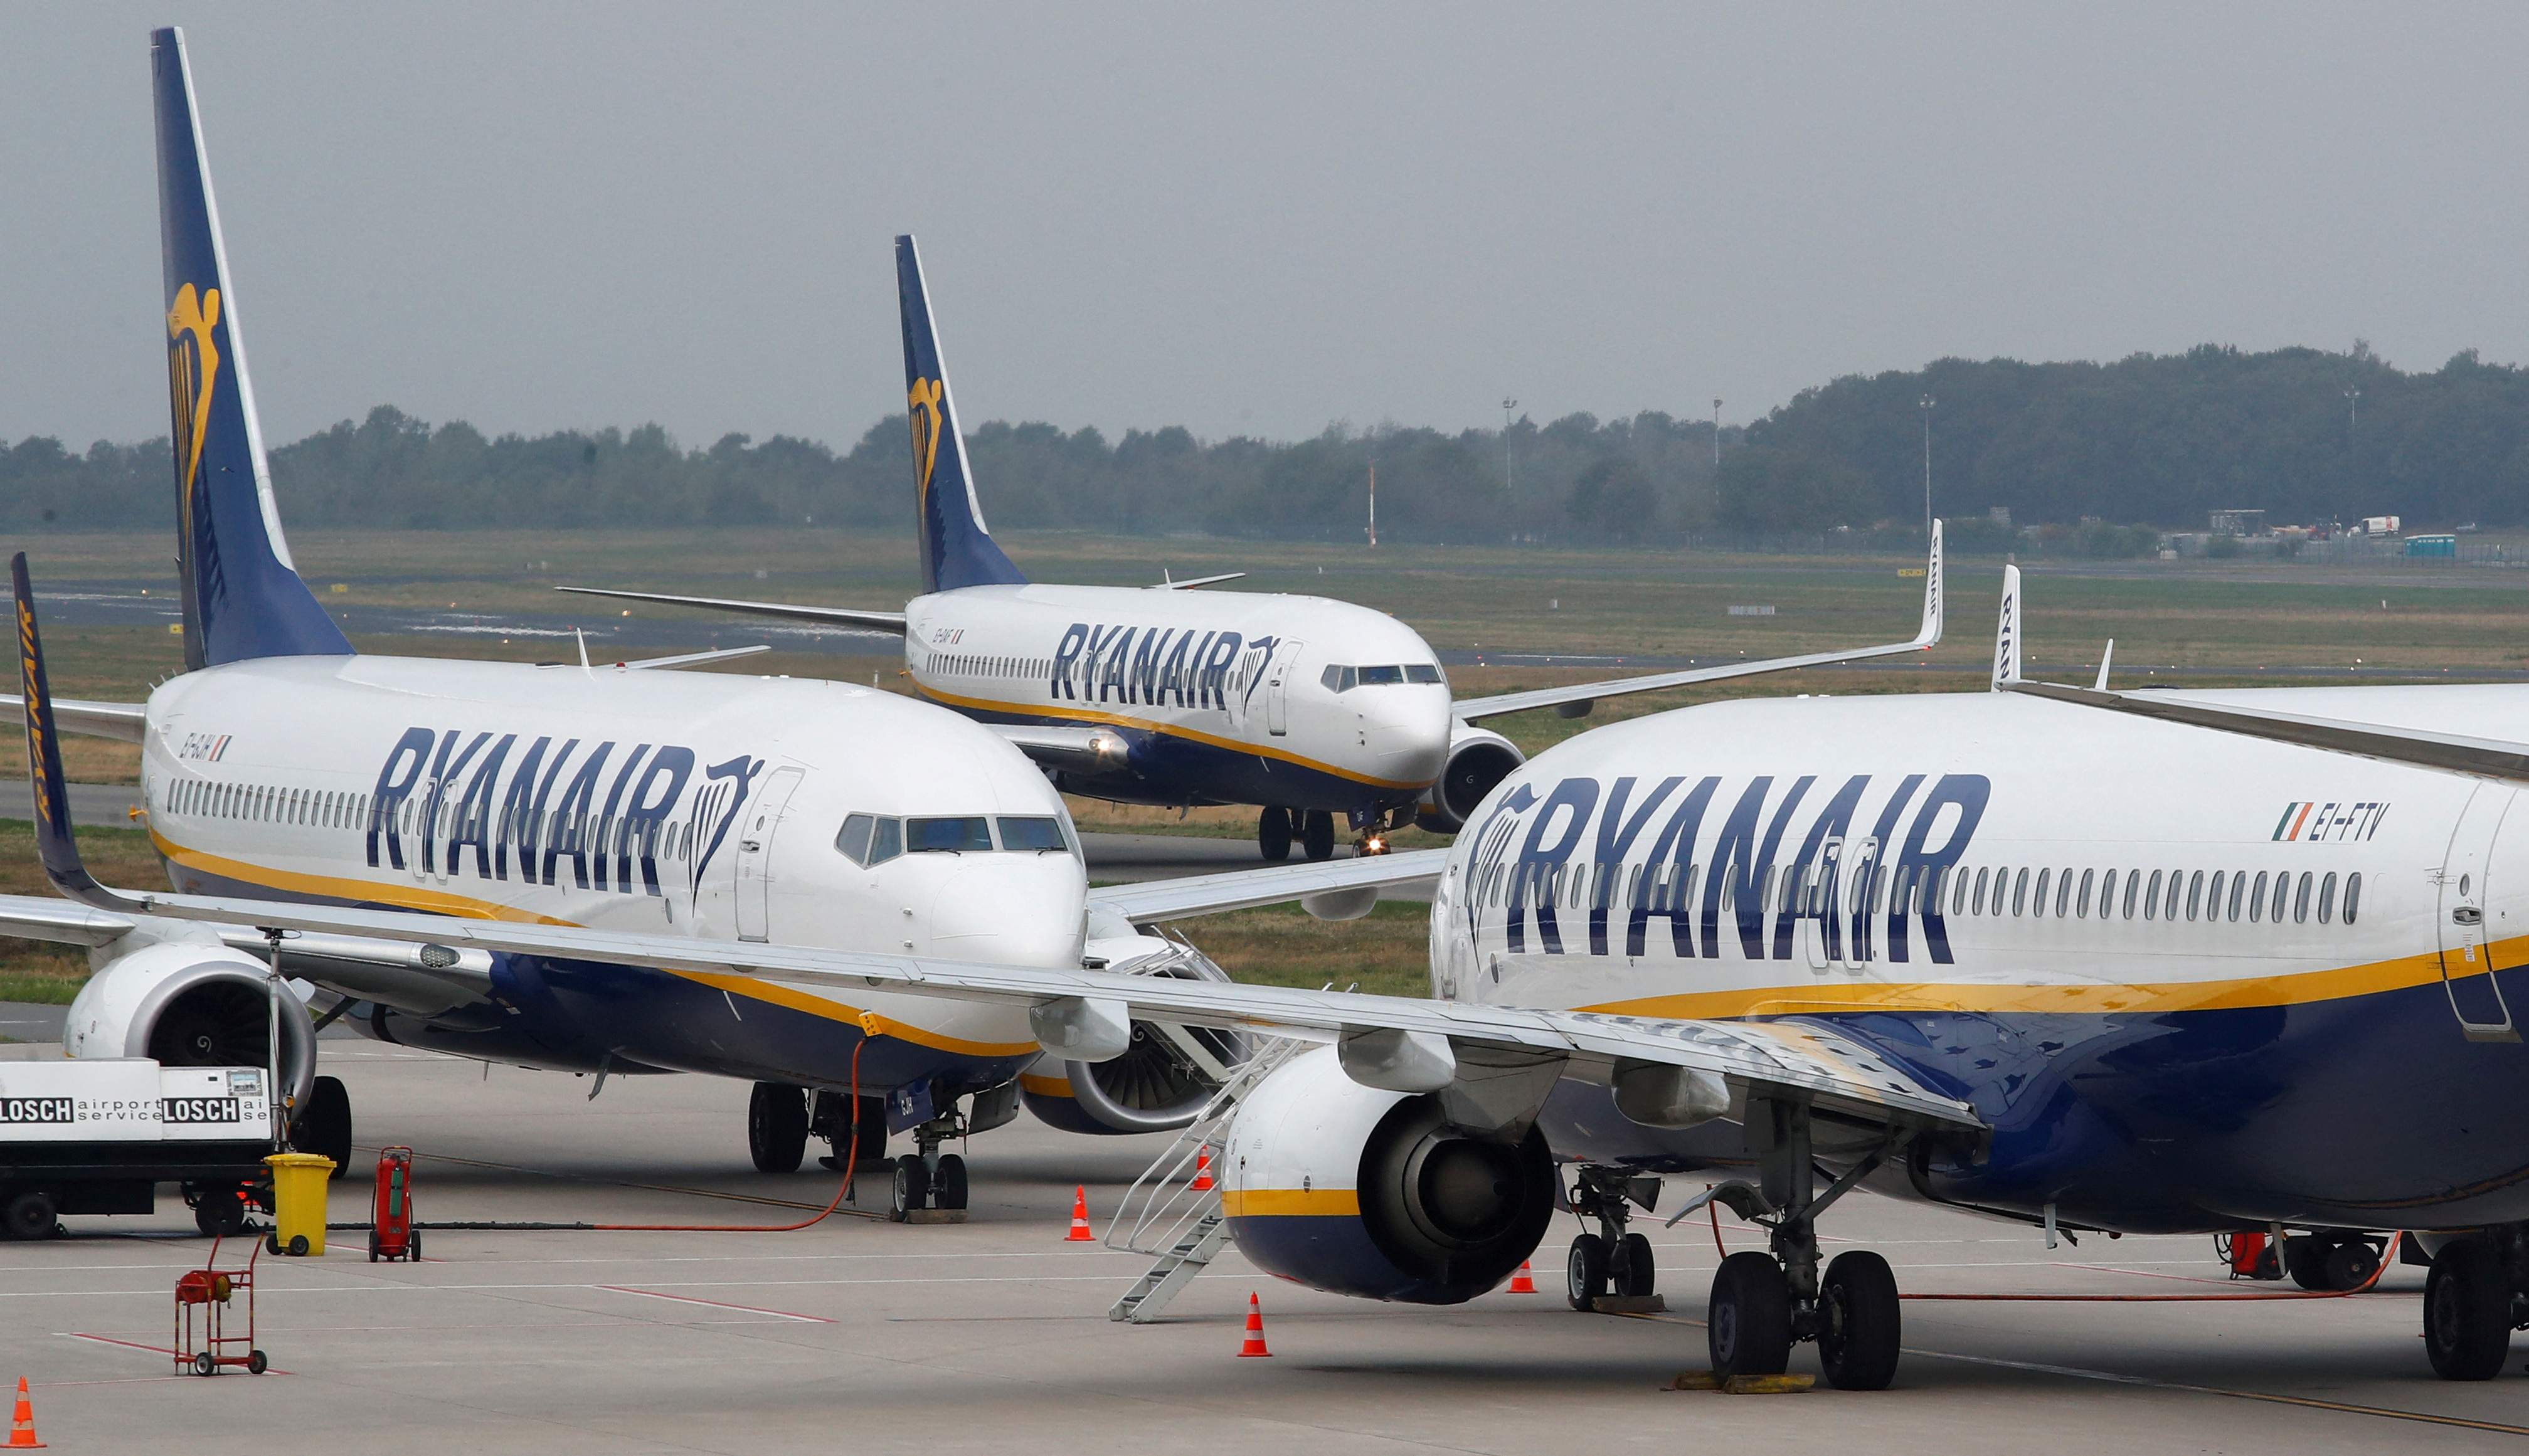 Ryanair airplane taxis past two parked aircraft at Weeze Airport